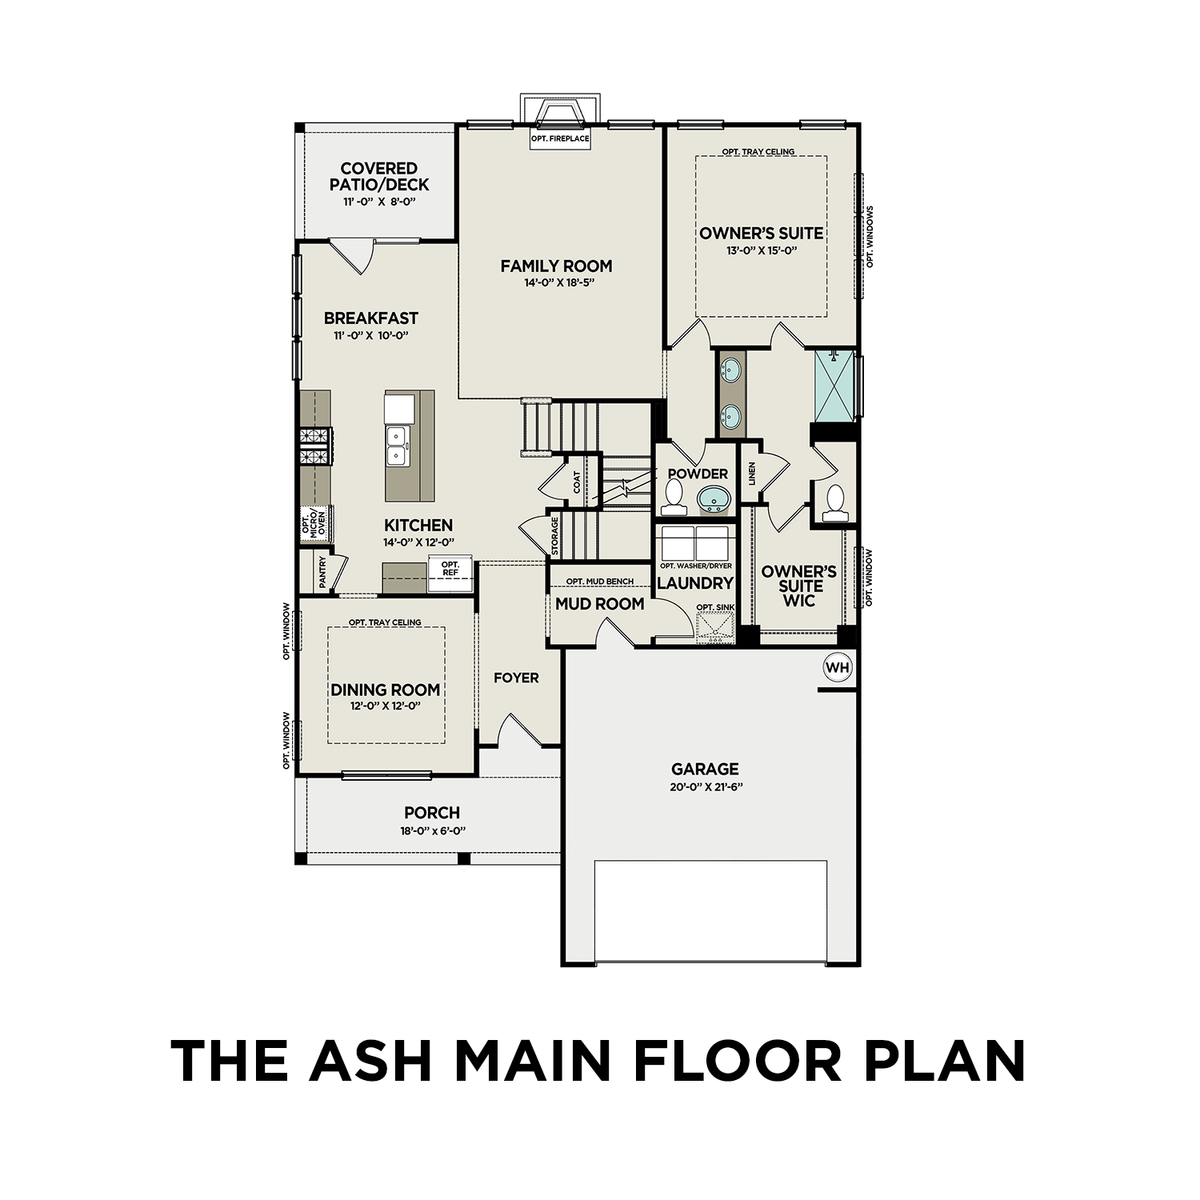 1 - The Ash A floor plan layout for 3611 Rivermont Way in Davidson Homes' Salem Landing community.